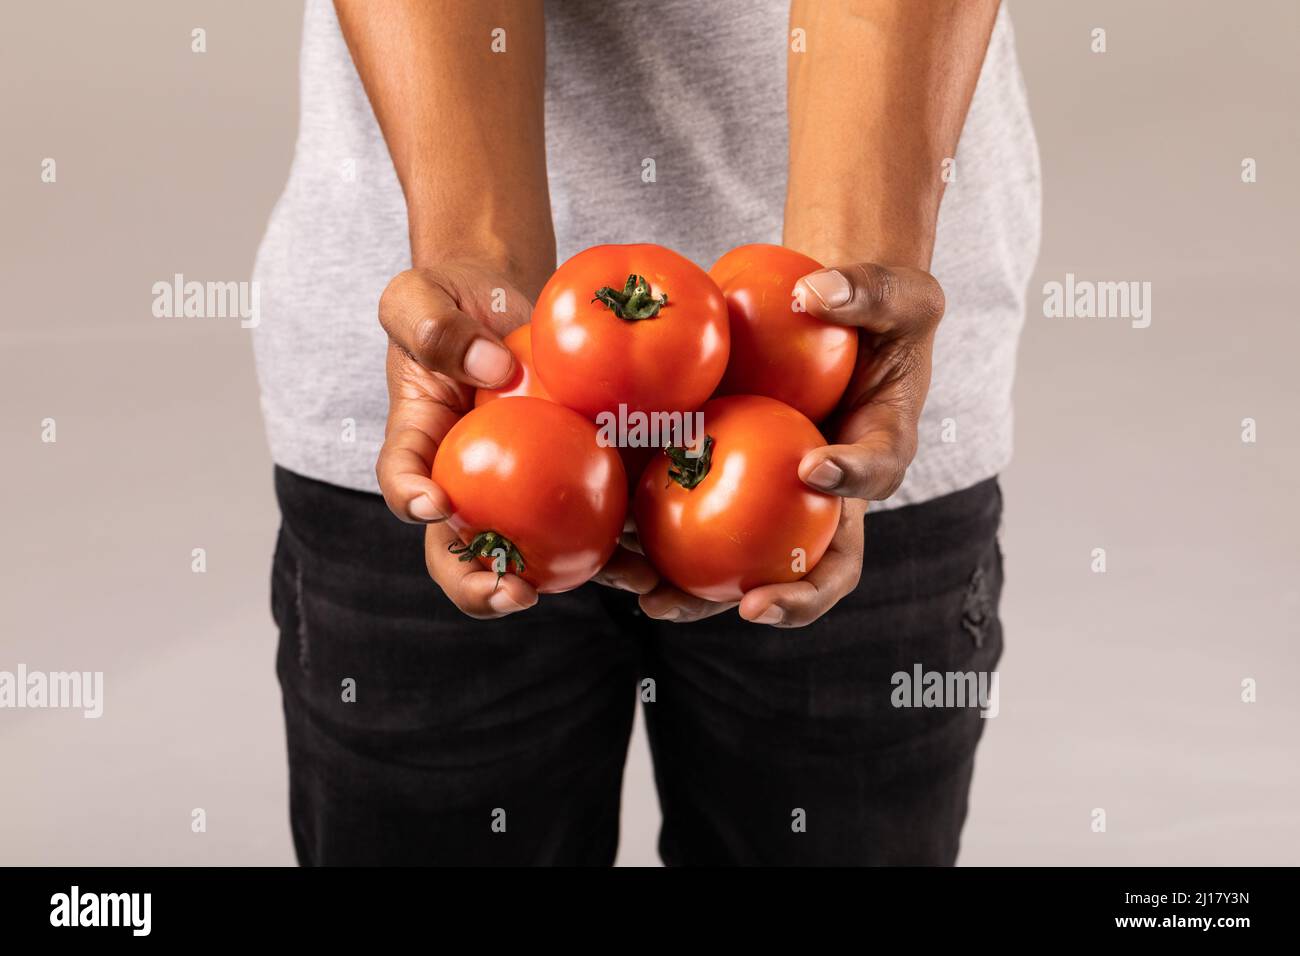 Midsection of man holding fresh red tomatoes standing against white background Stock Photo